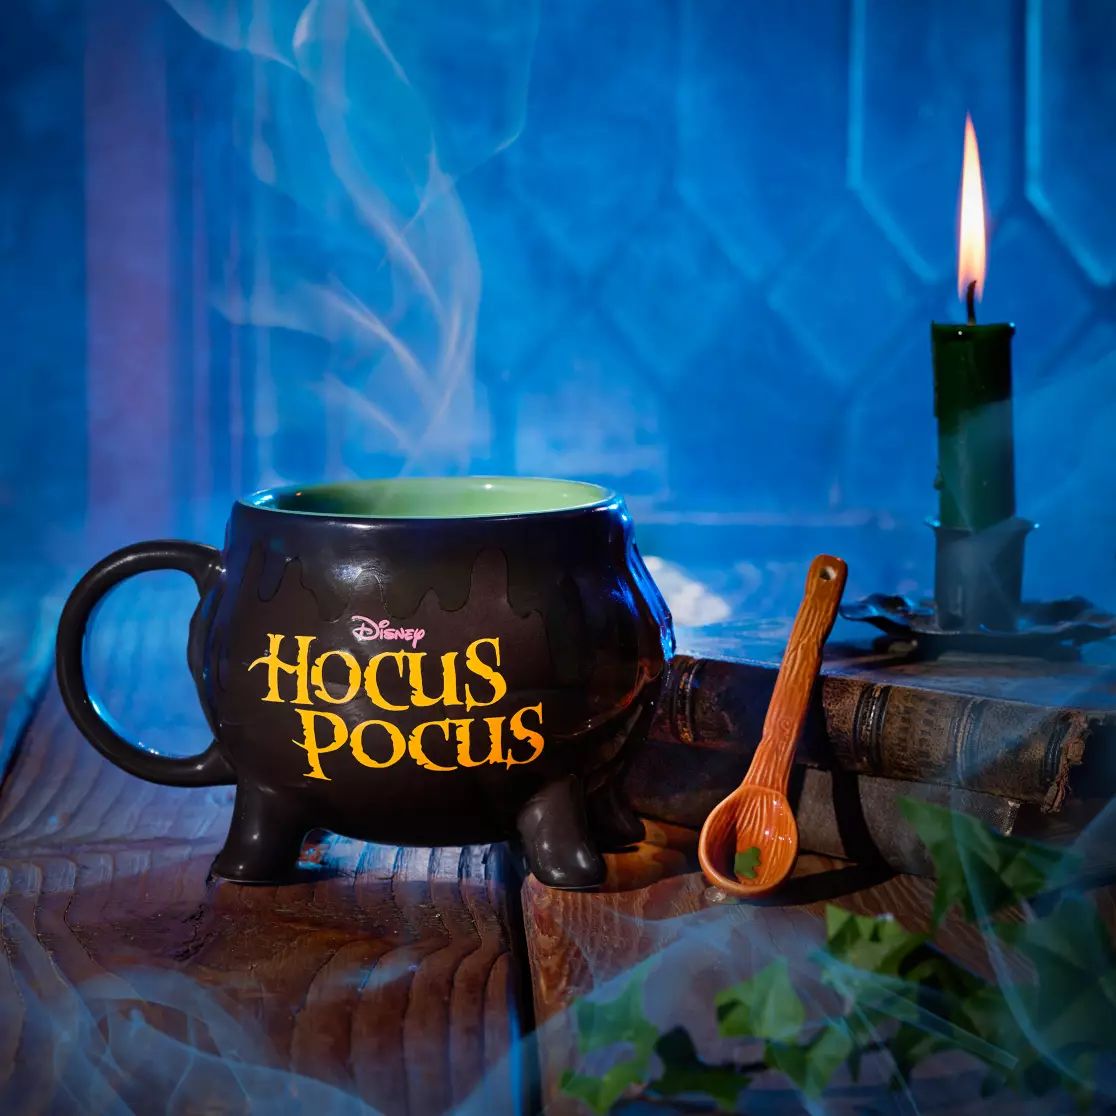 Hocus Pocus Color Changing Mug with Spoon | Disney Store